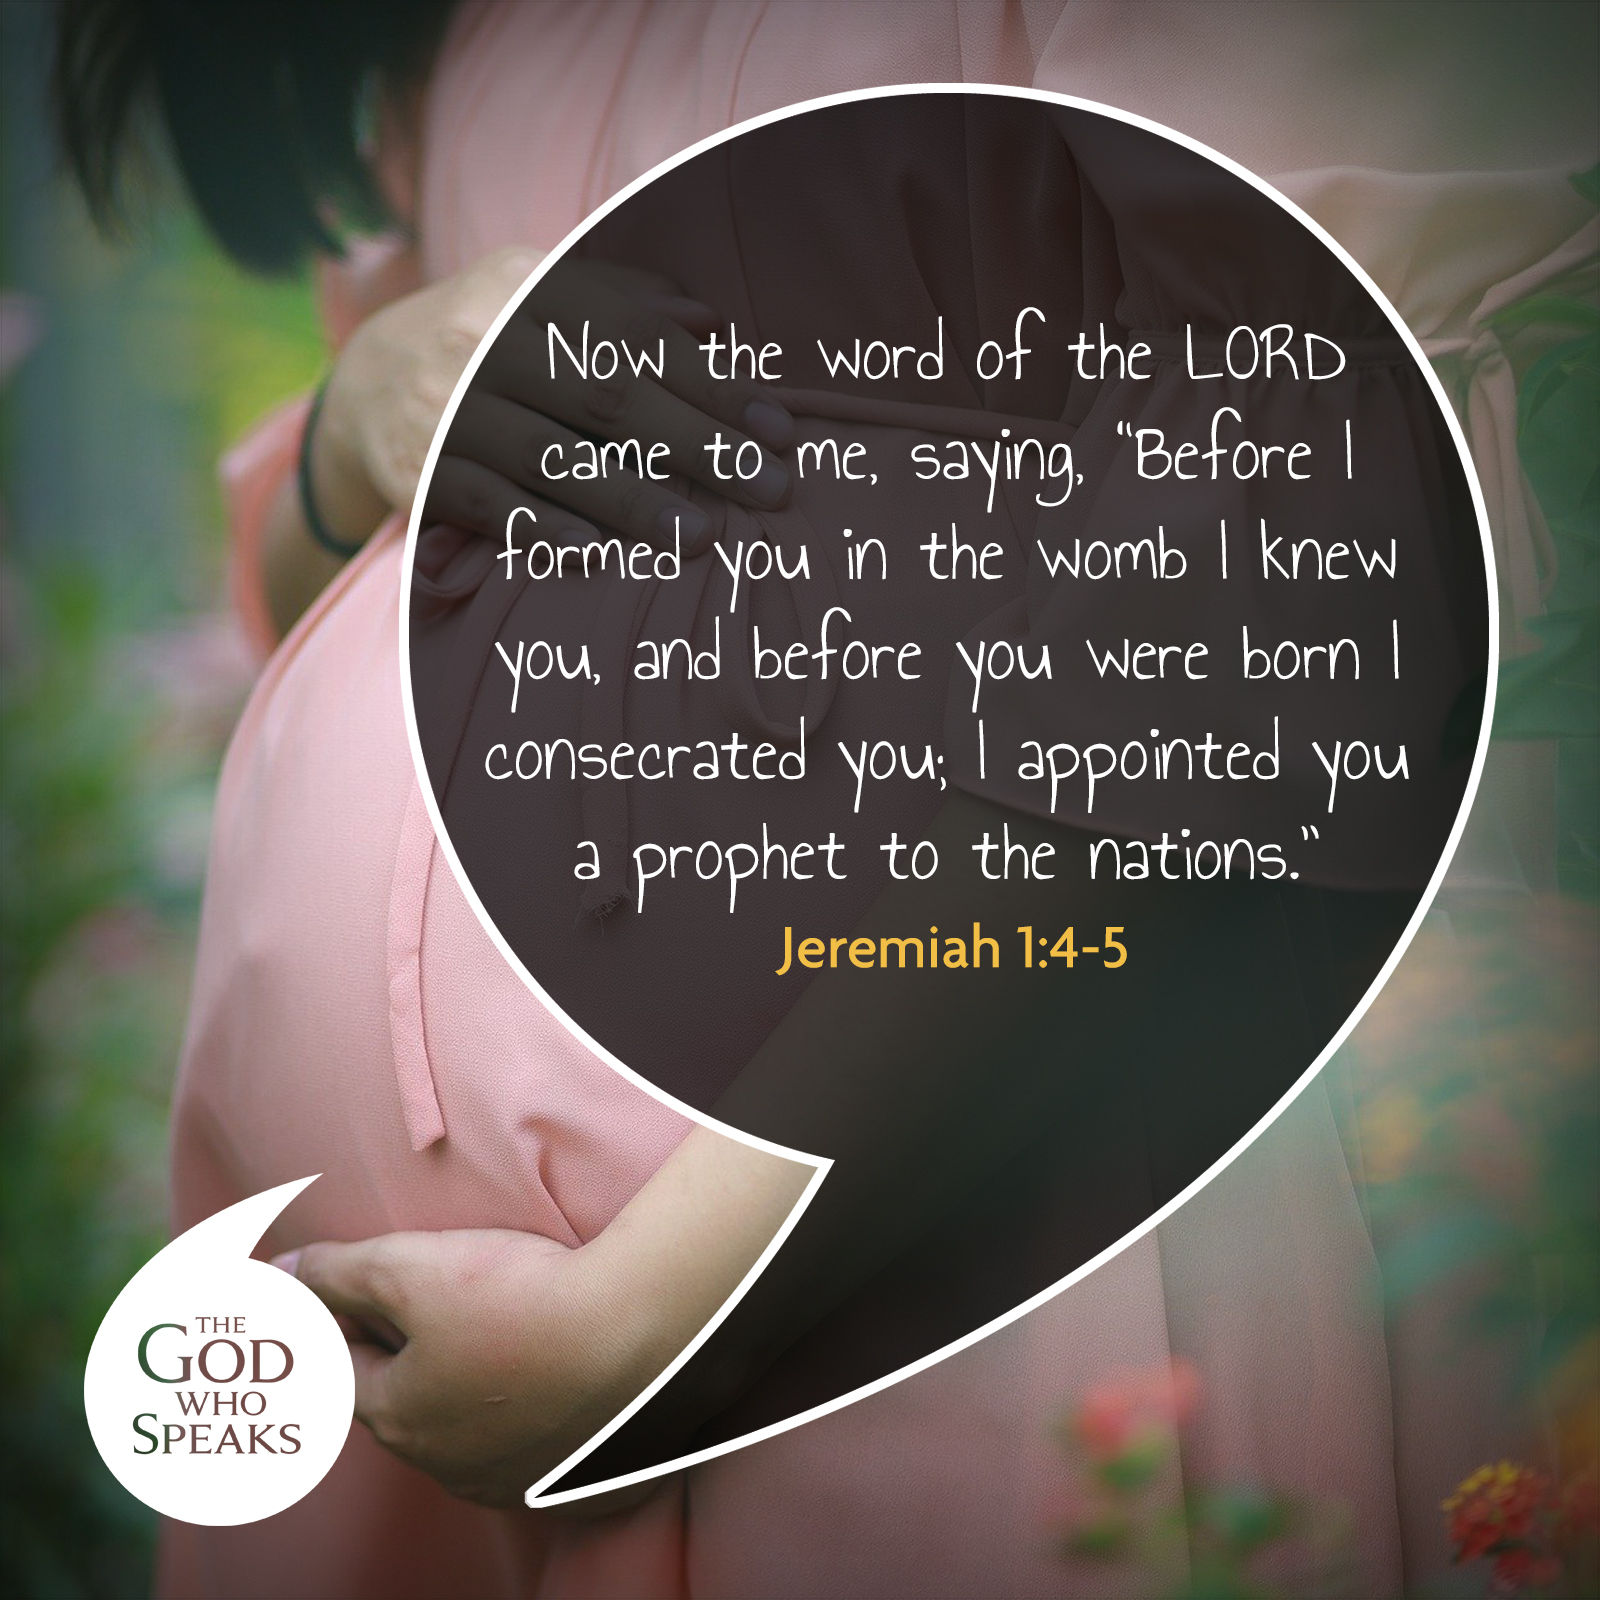 Now the Word 0f the LORD came to me; saying; "Before formed you in the Womb knew you and before Yu Were born / consecrated you; appointed you to the nations: Jeremiah 1:4-5 E GOp WHO SPEAKS Prophet